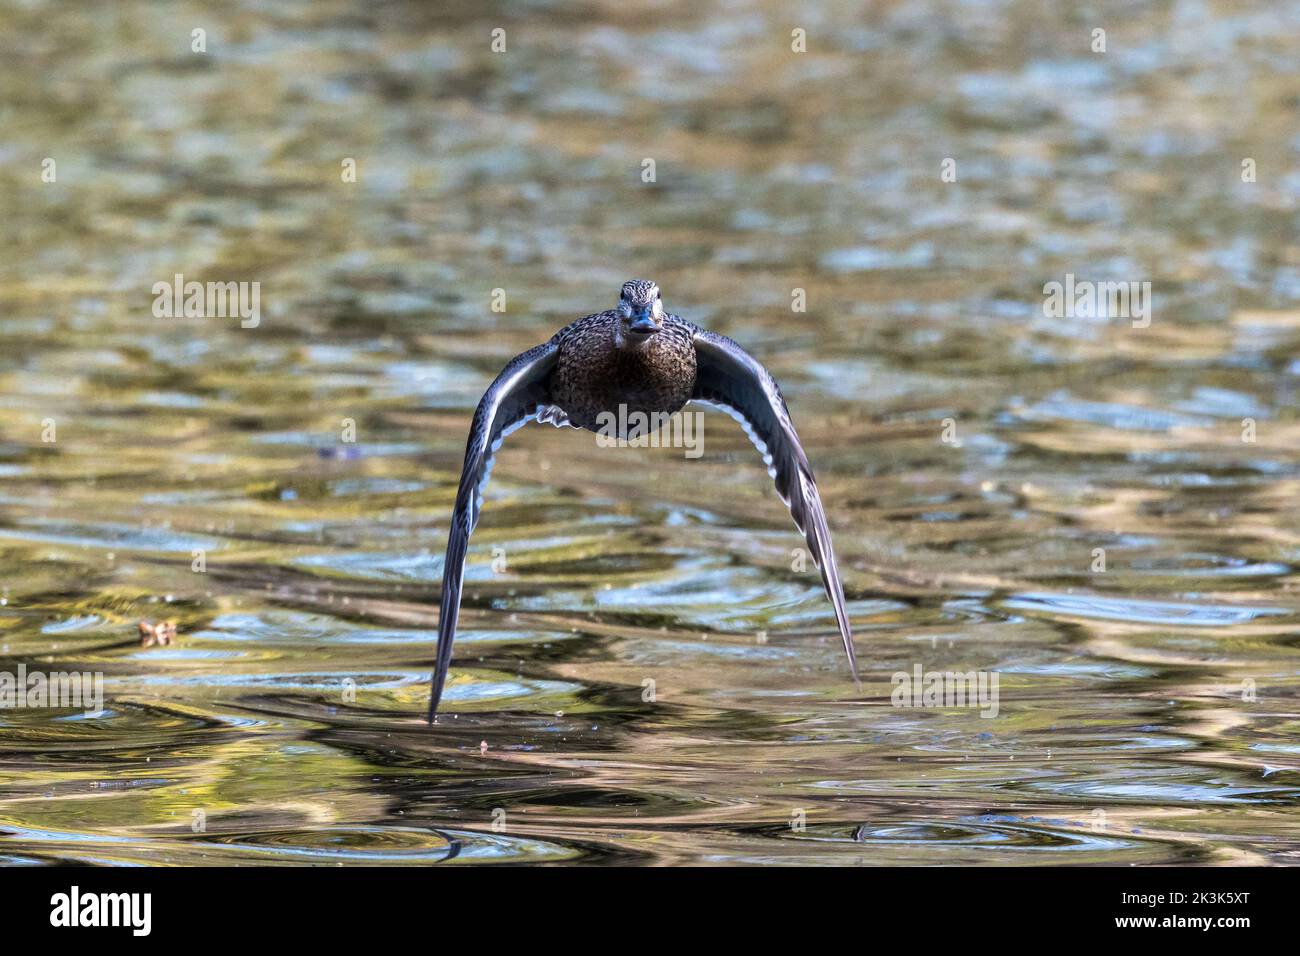 The mallard, Anas platyrhynchos is a dabbling duck. Here flying in the air over a lake in Munich, Germany. Stock Photo